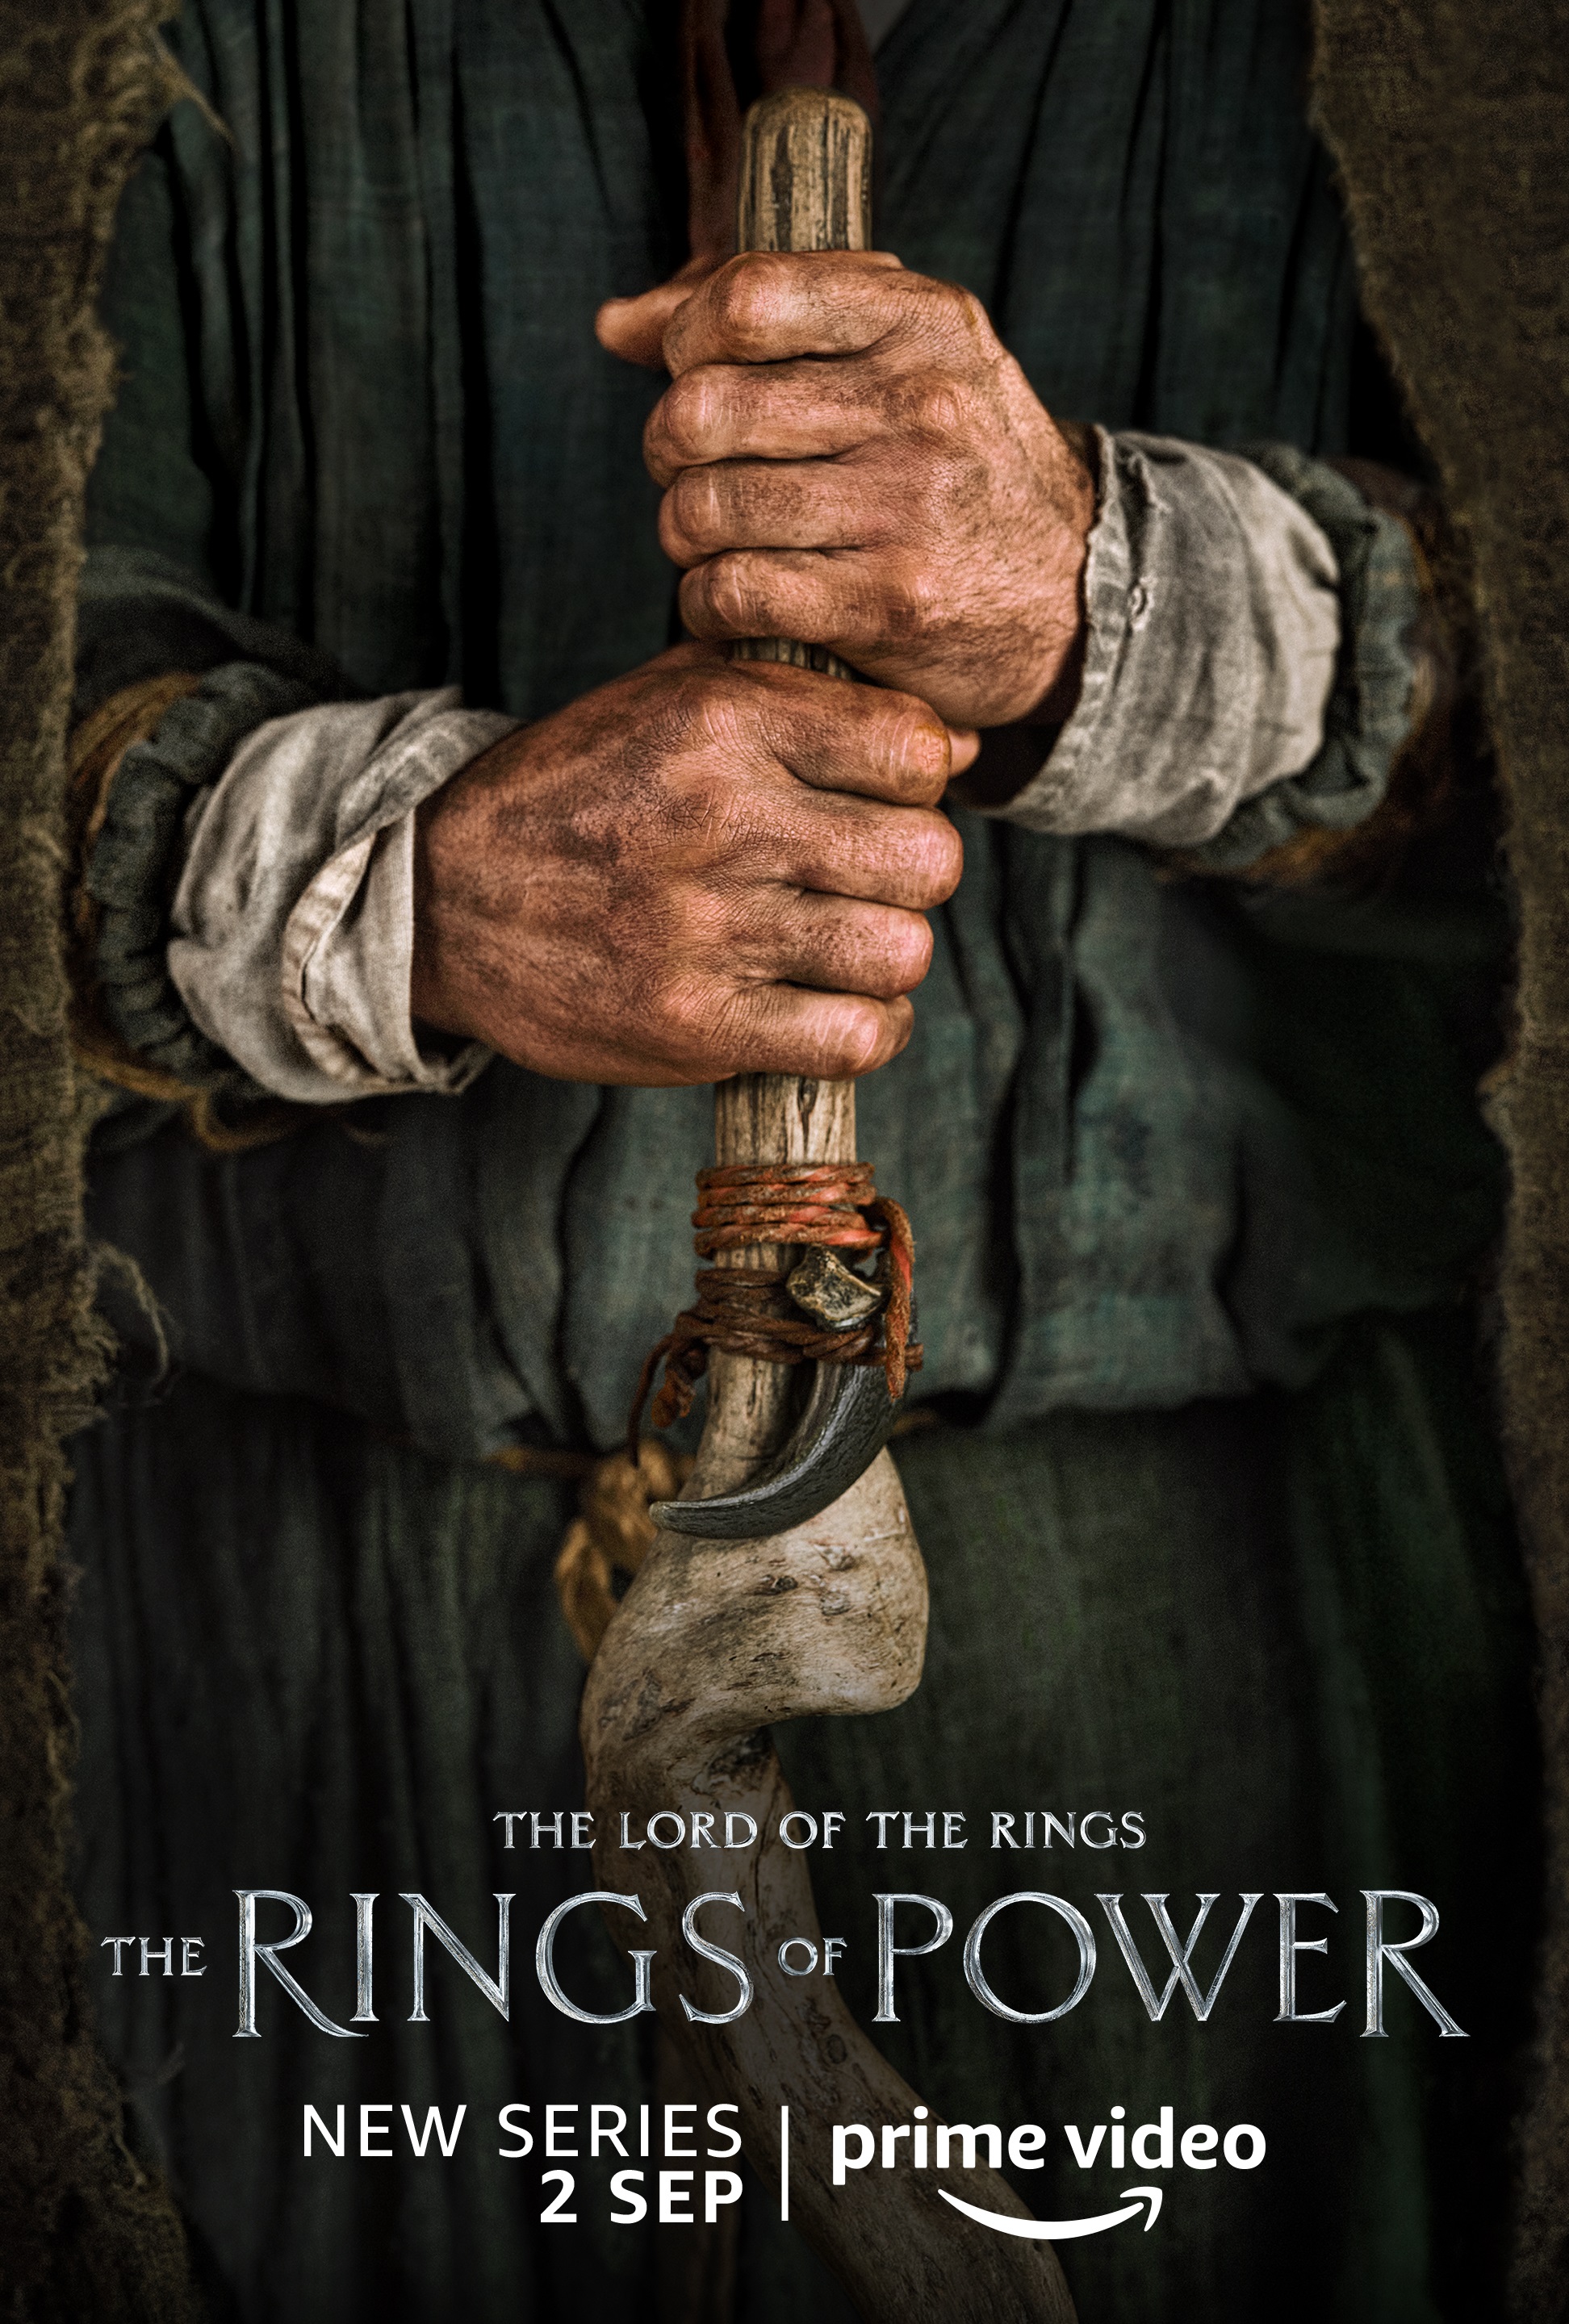 A person holding a club character poster for Lord of the Rings: The Rings of Power